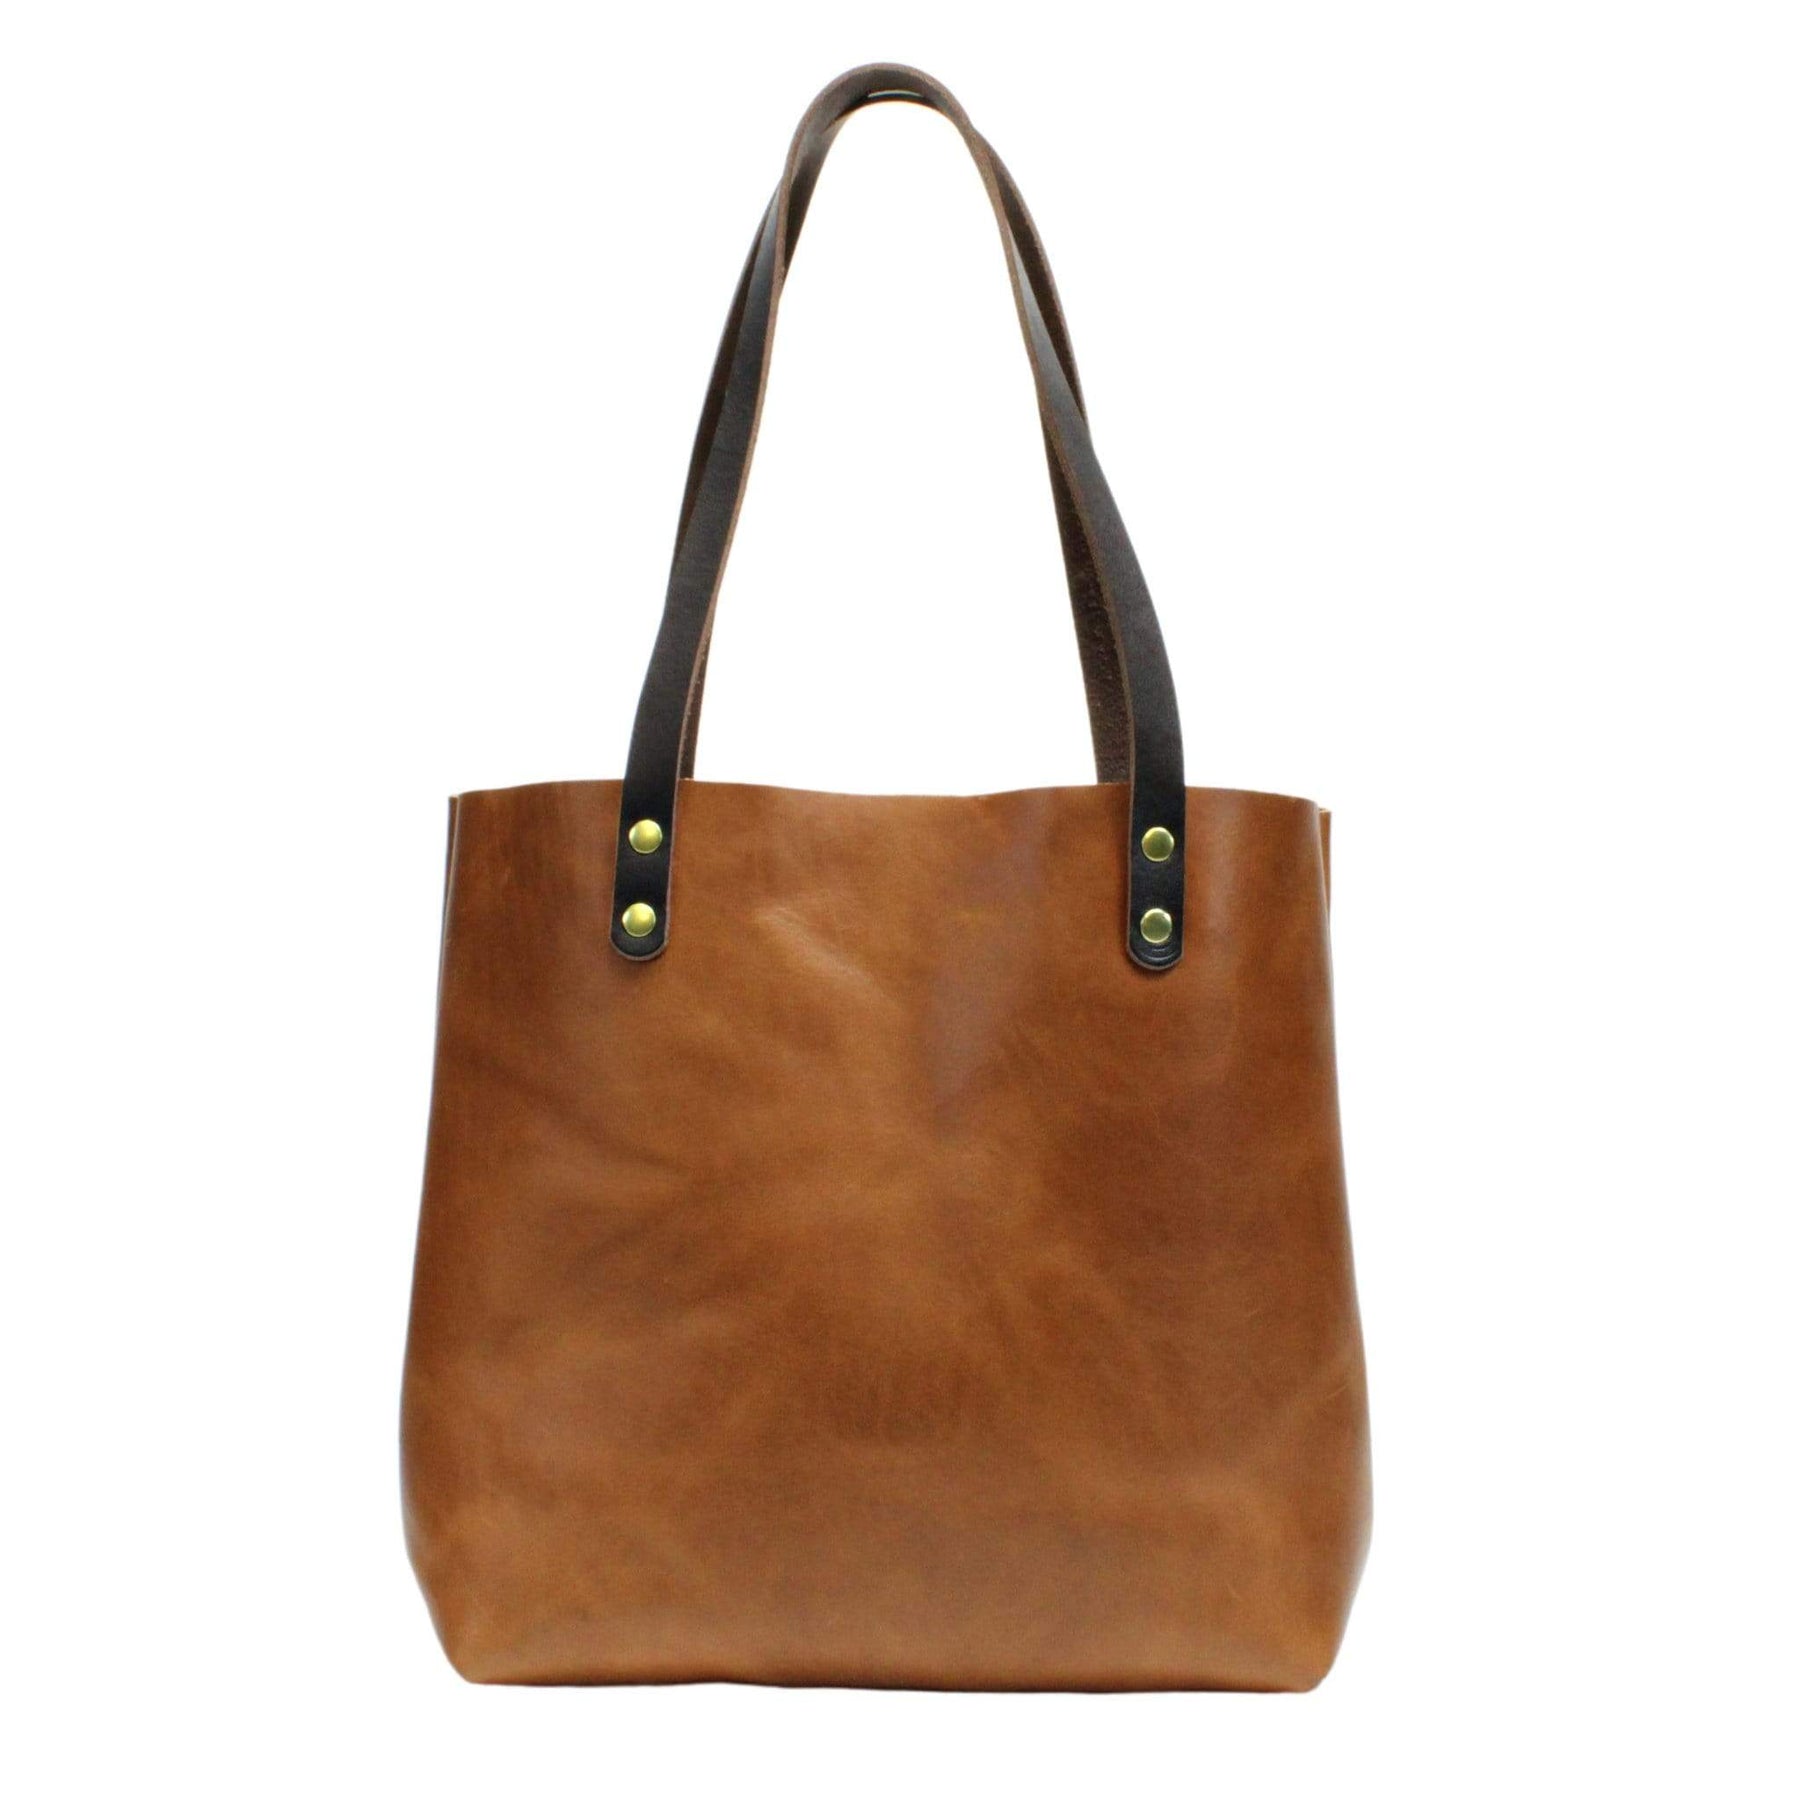 Women's Leather Tote Bags in Tan Pull Up| Kerry Noël